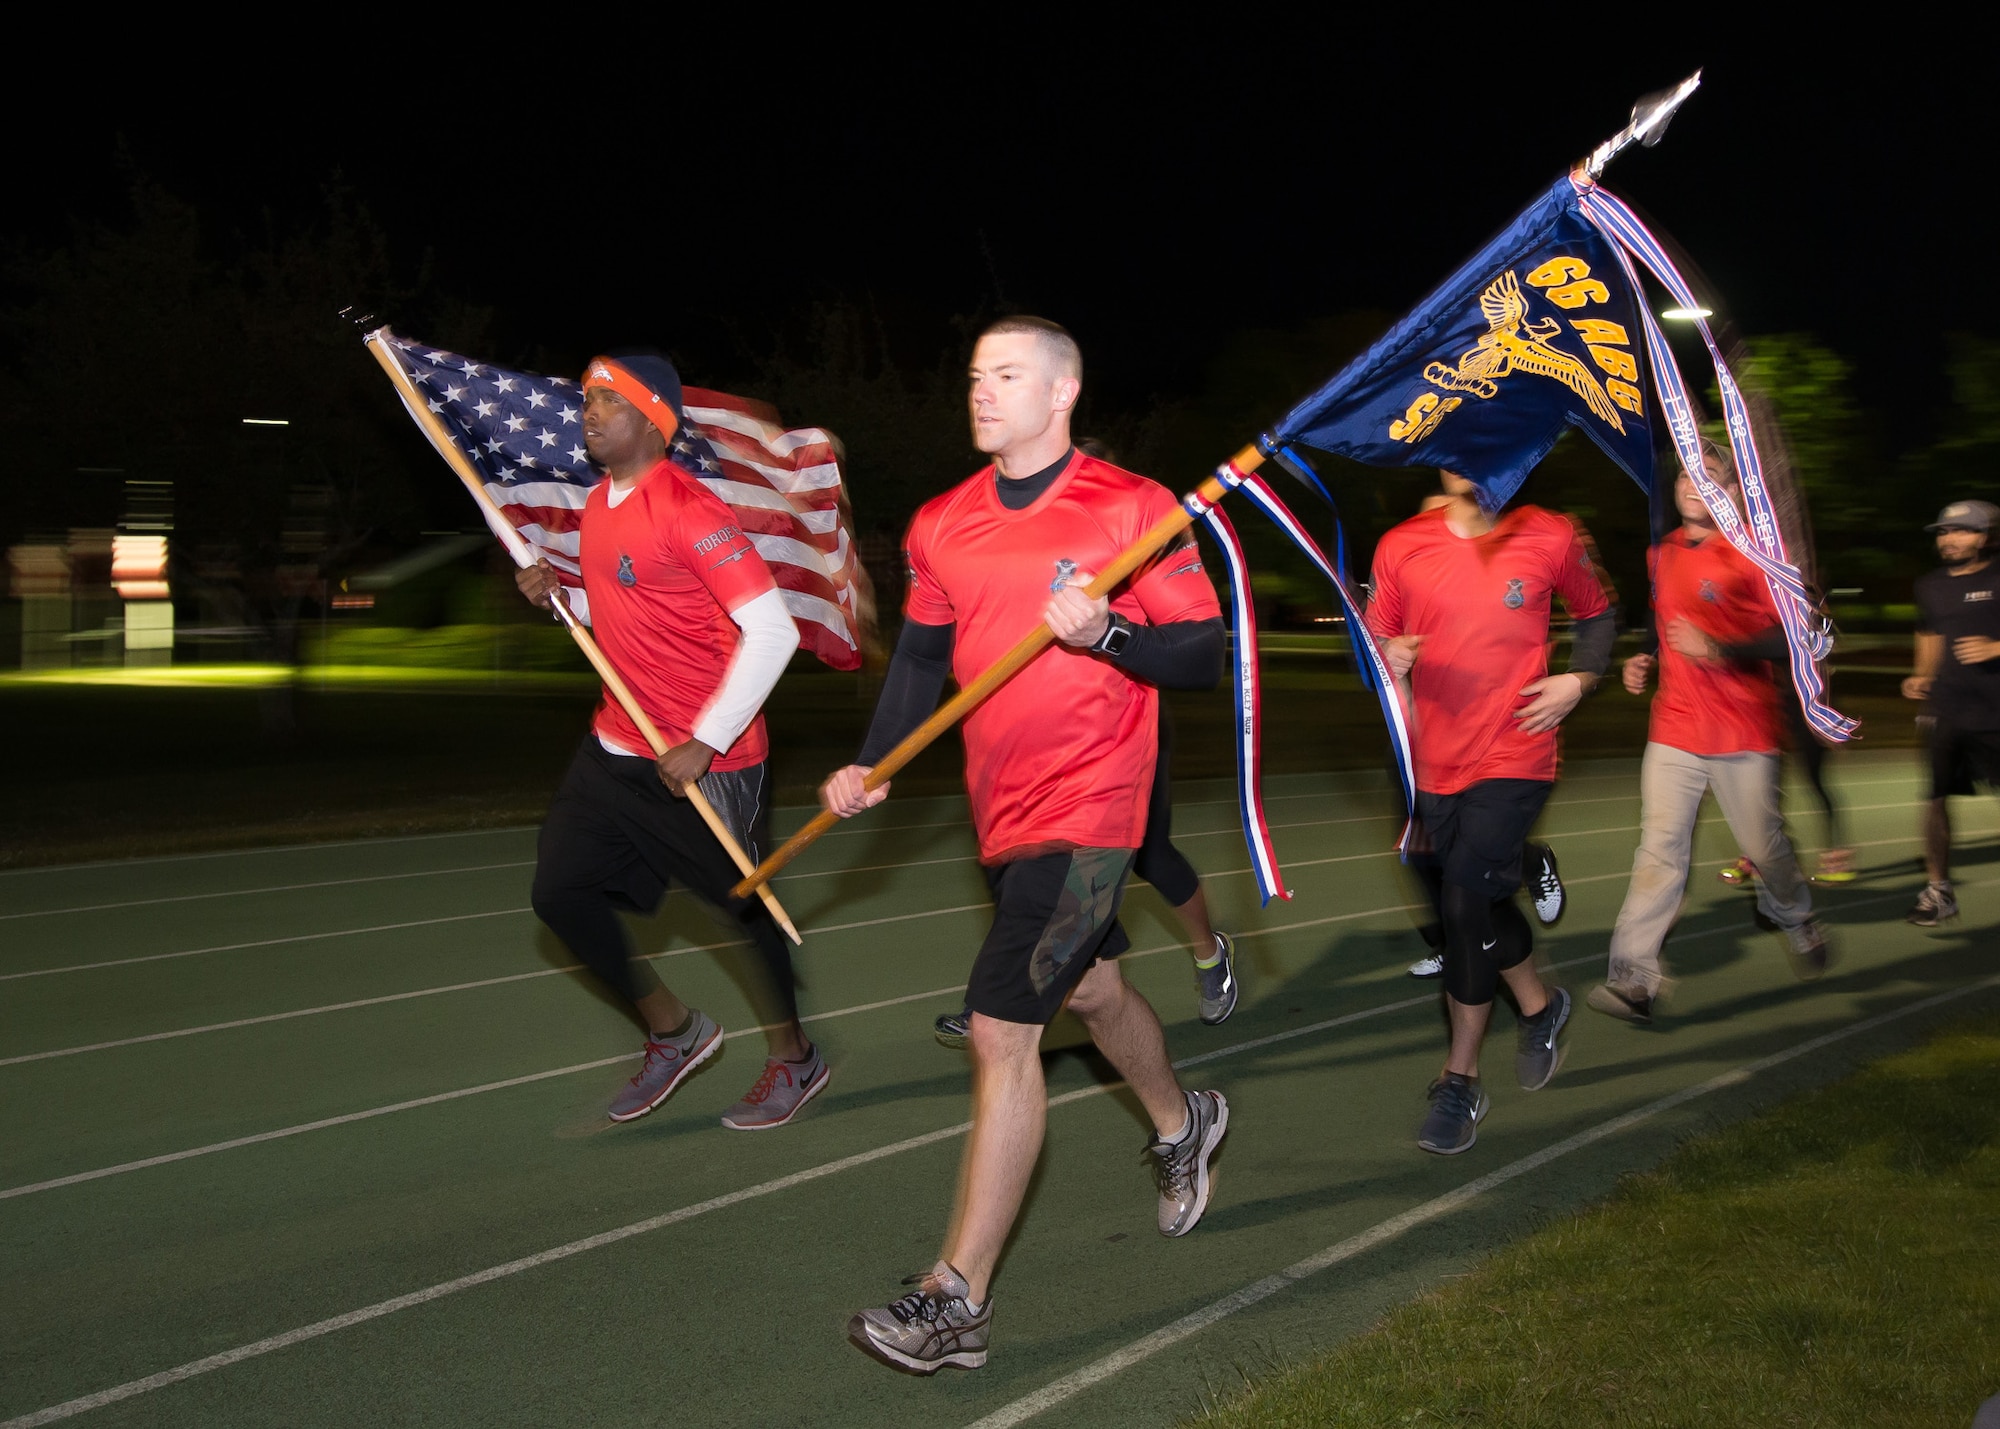 Capt. Christopher McNamee, right, and Tech. Sgt. Harvey Holloway, Jr., each members of the 66th Security Forces Squadron, lead Airmen while carrying the American flag and squadron guidon during a 24-Hour End of Watch Memorial Run at the base track May 16. To begin this year's Police Week activities, 66 SFS personnel hosted the memorial run in memory of Senior Airmen Kcey Ruiz and Nathan Sartain who died last fall while serving in Afghanistan. (U.S. Air Force photo by Mark Herlihy)